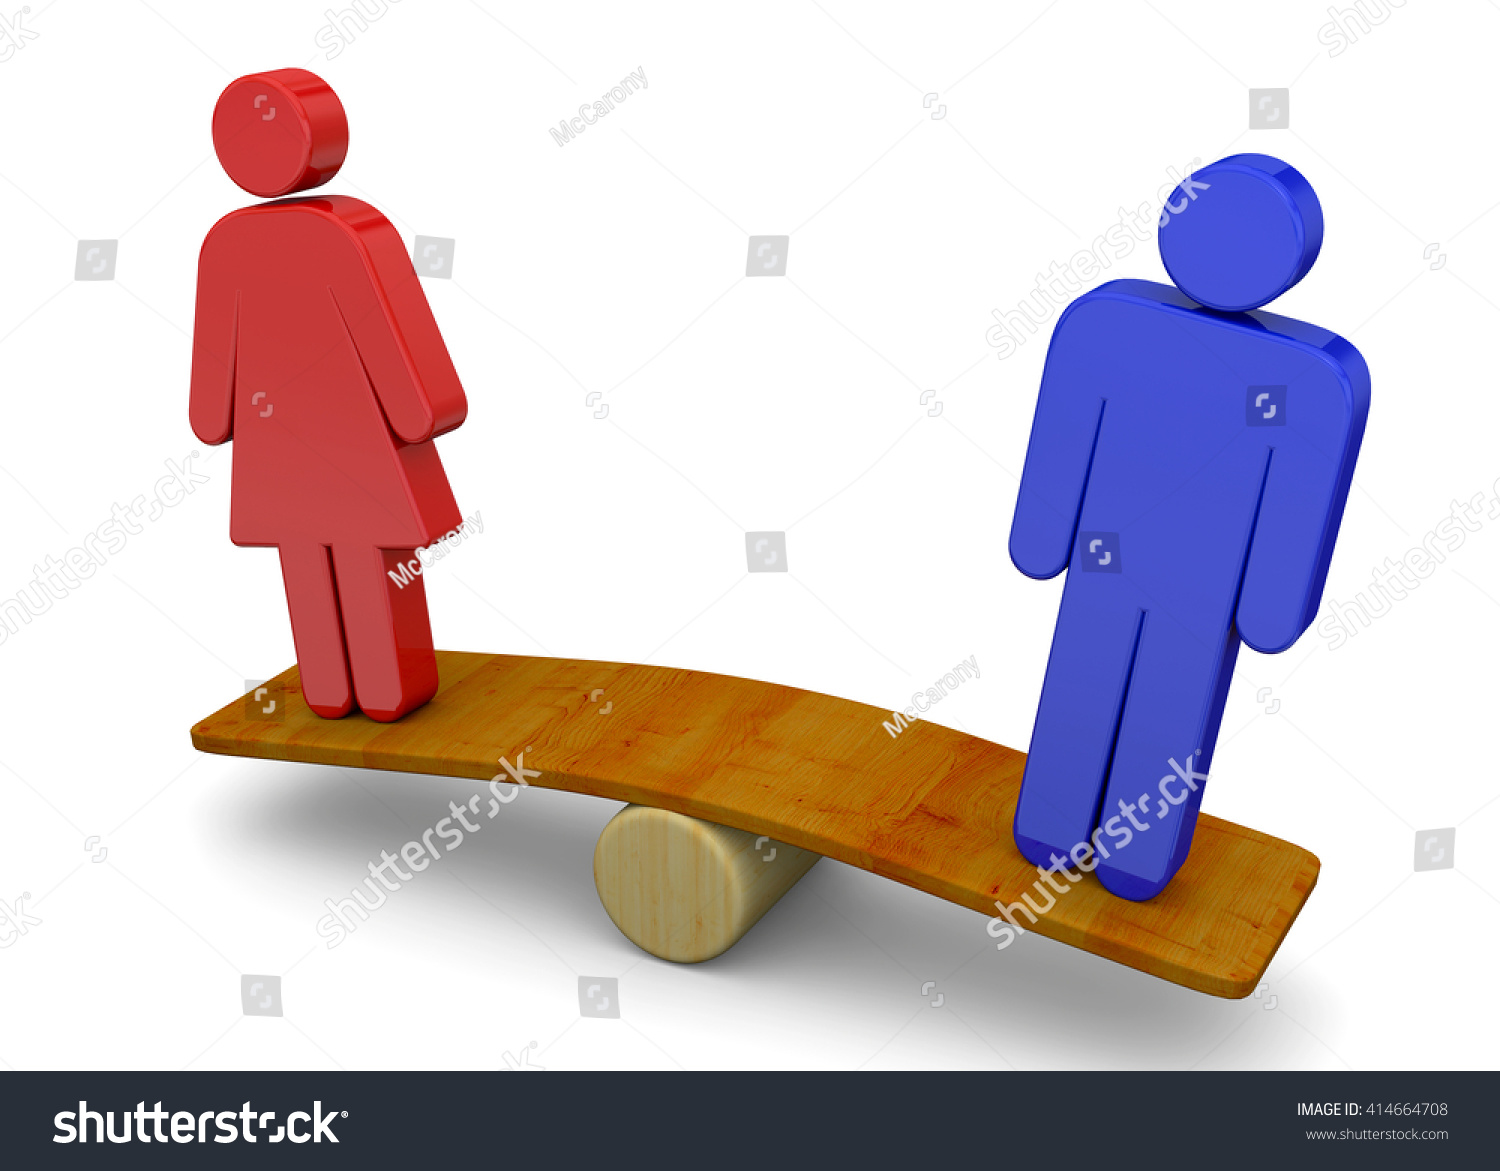 Man Woman Sex Equality Concept 3d Stock Illustration 414664708 Shutterstock 